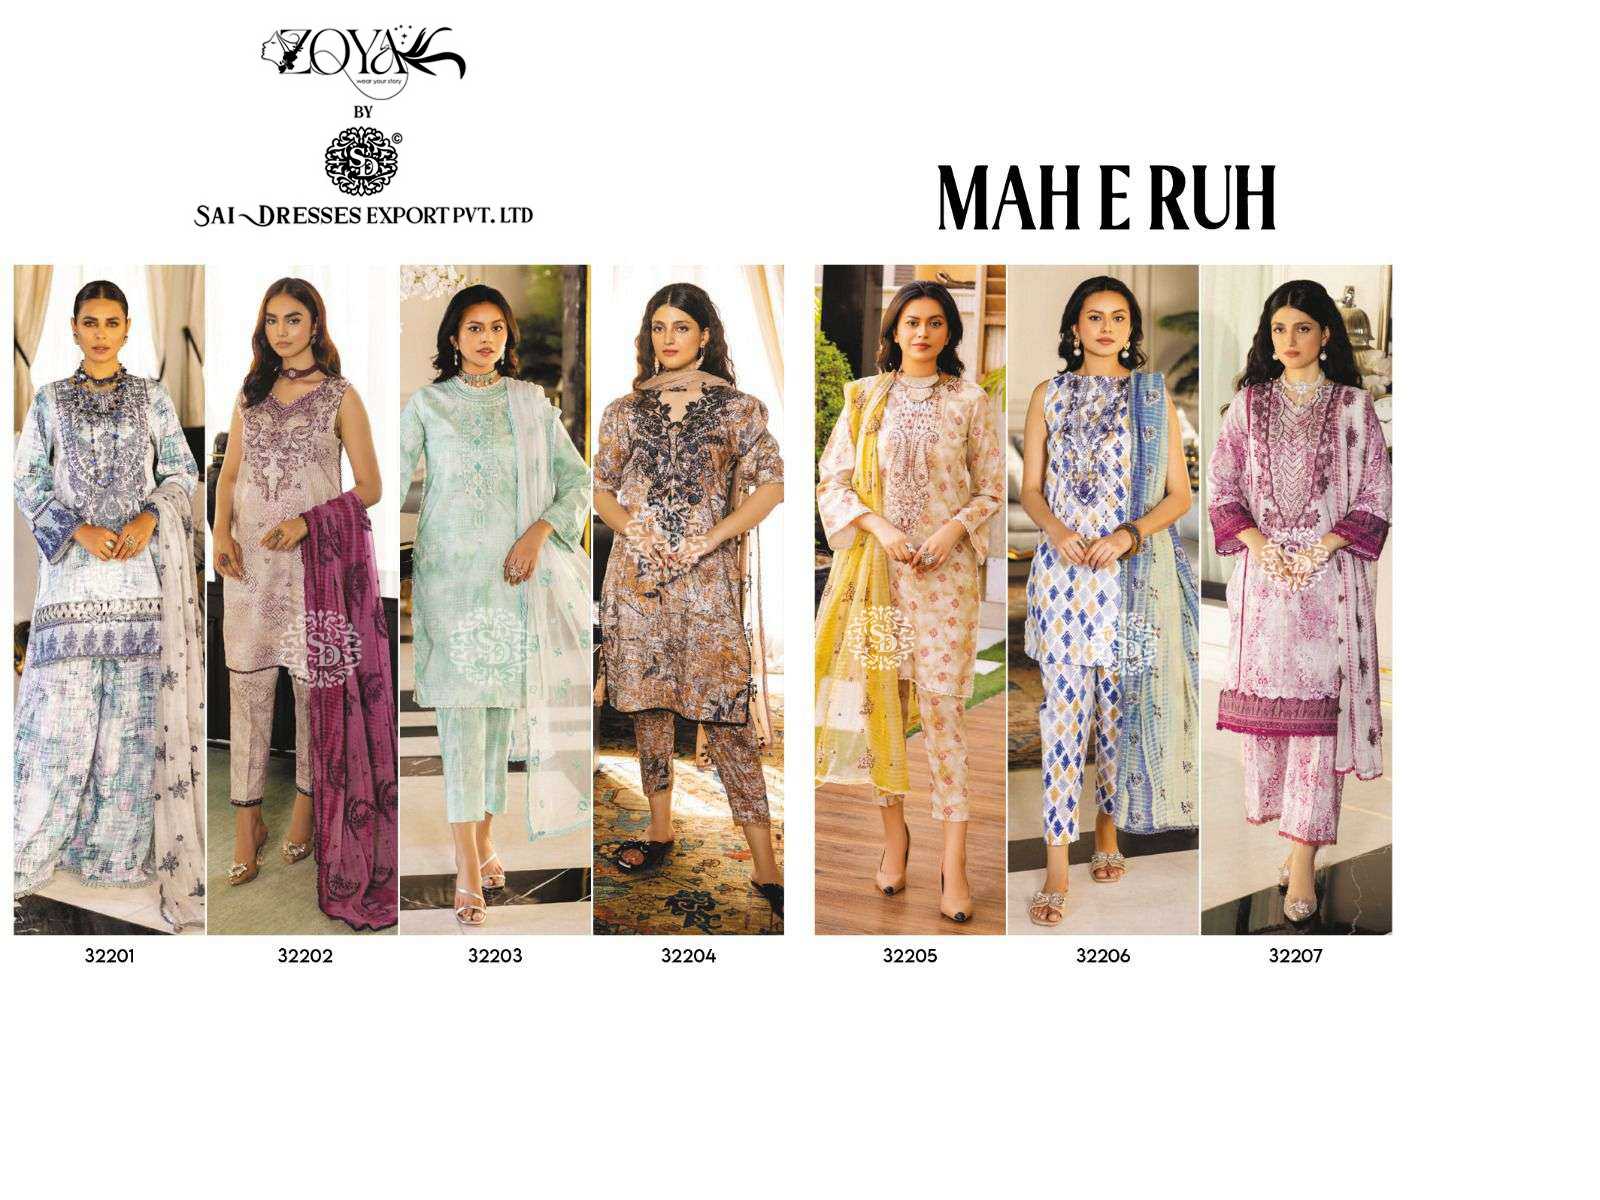 SAI DRESSES PRESENT MAHERUH PURE COTTON WITH SELF EMBROIDERED PAKISTANI DESIGNER SALWAR SUITS IN WHOLESALE RATE IN SURAT